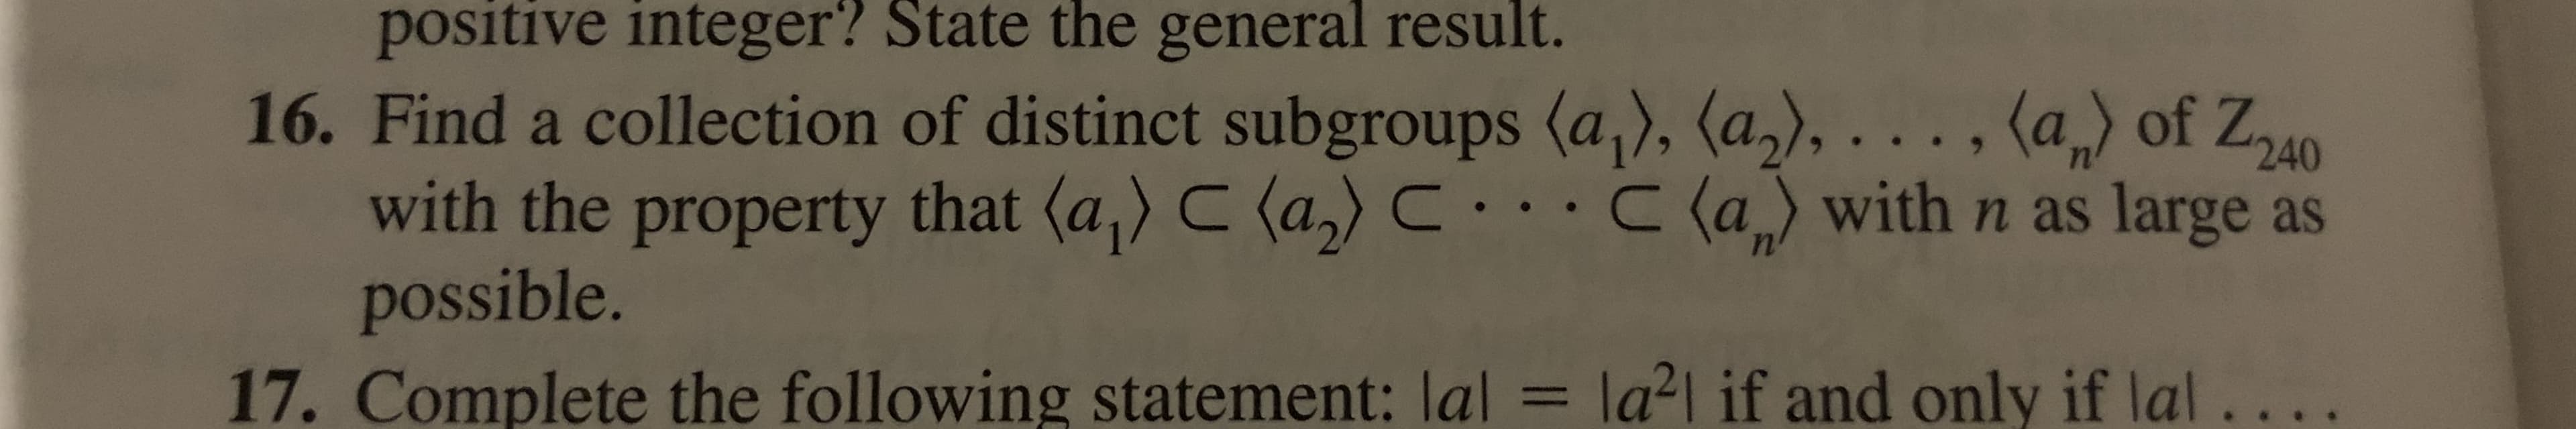 positive integer? State the general result.
16. Find a collection of distinct subgroups (a), (a2),..., (a of Z40
with the property that (a) C (a)C..C (a with n as large as
possible.
= la2l if and only if lal..
17. Complete the following statement: lal
